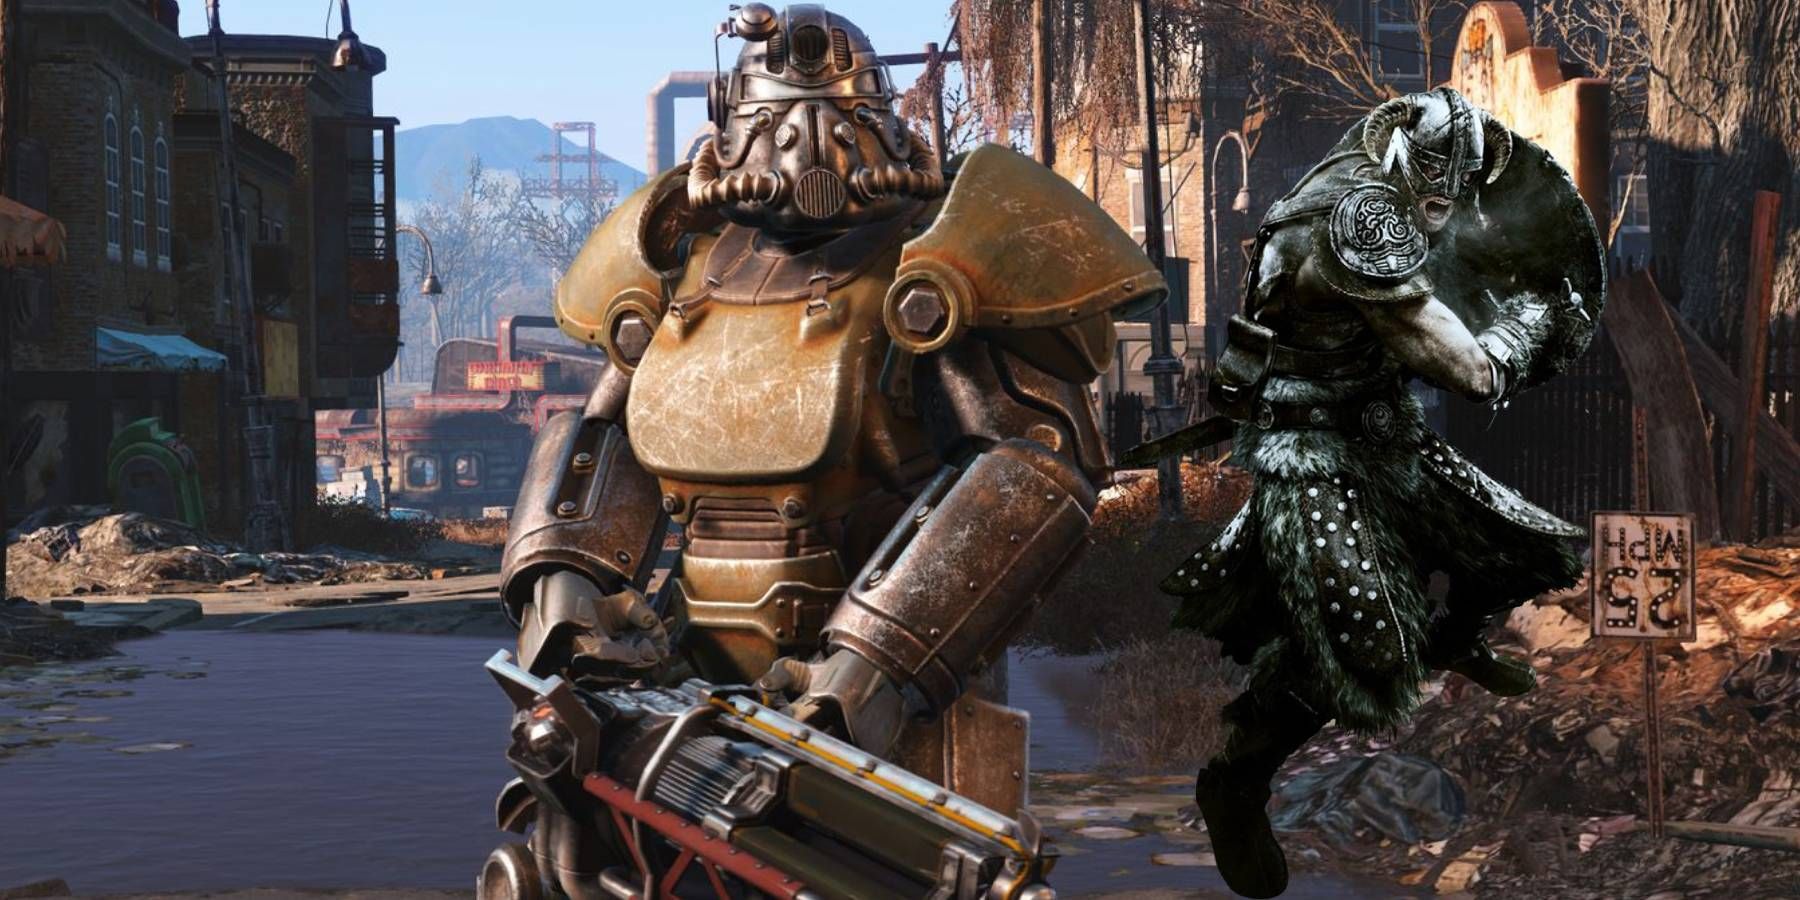 A character in power armor from Fallout 4 and a Nord Dragonborn from Skyrim